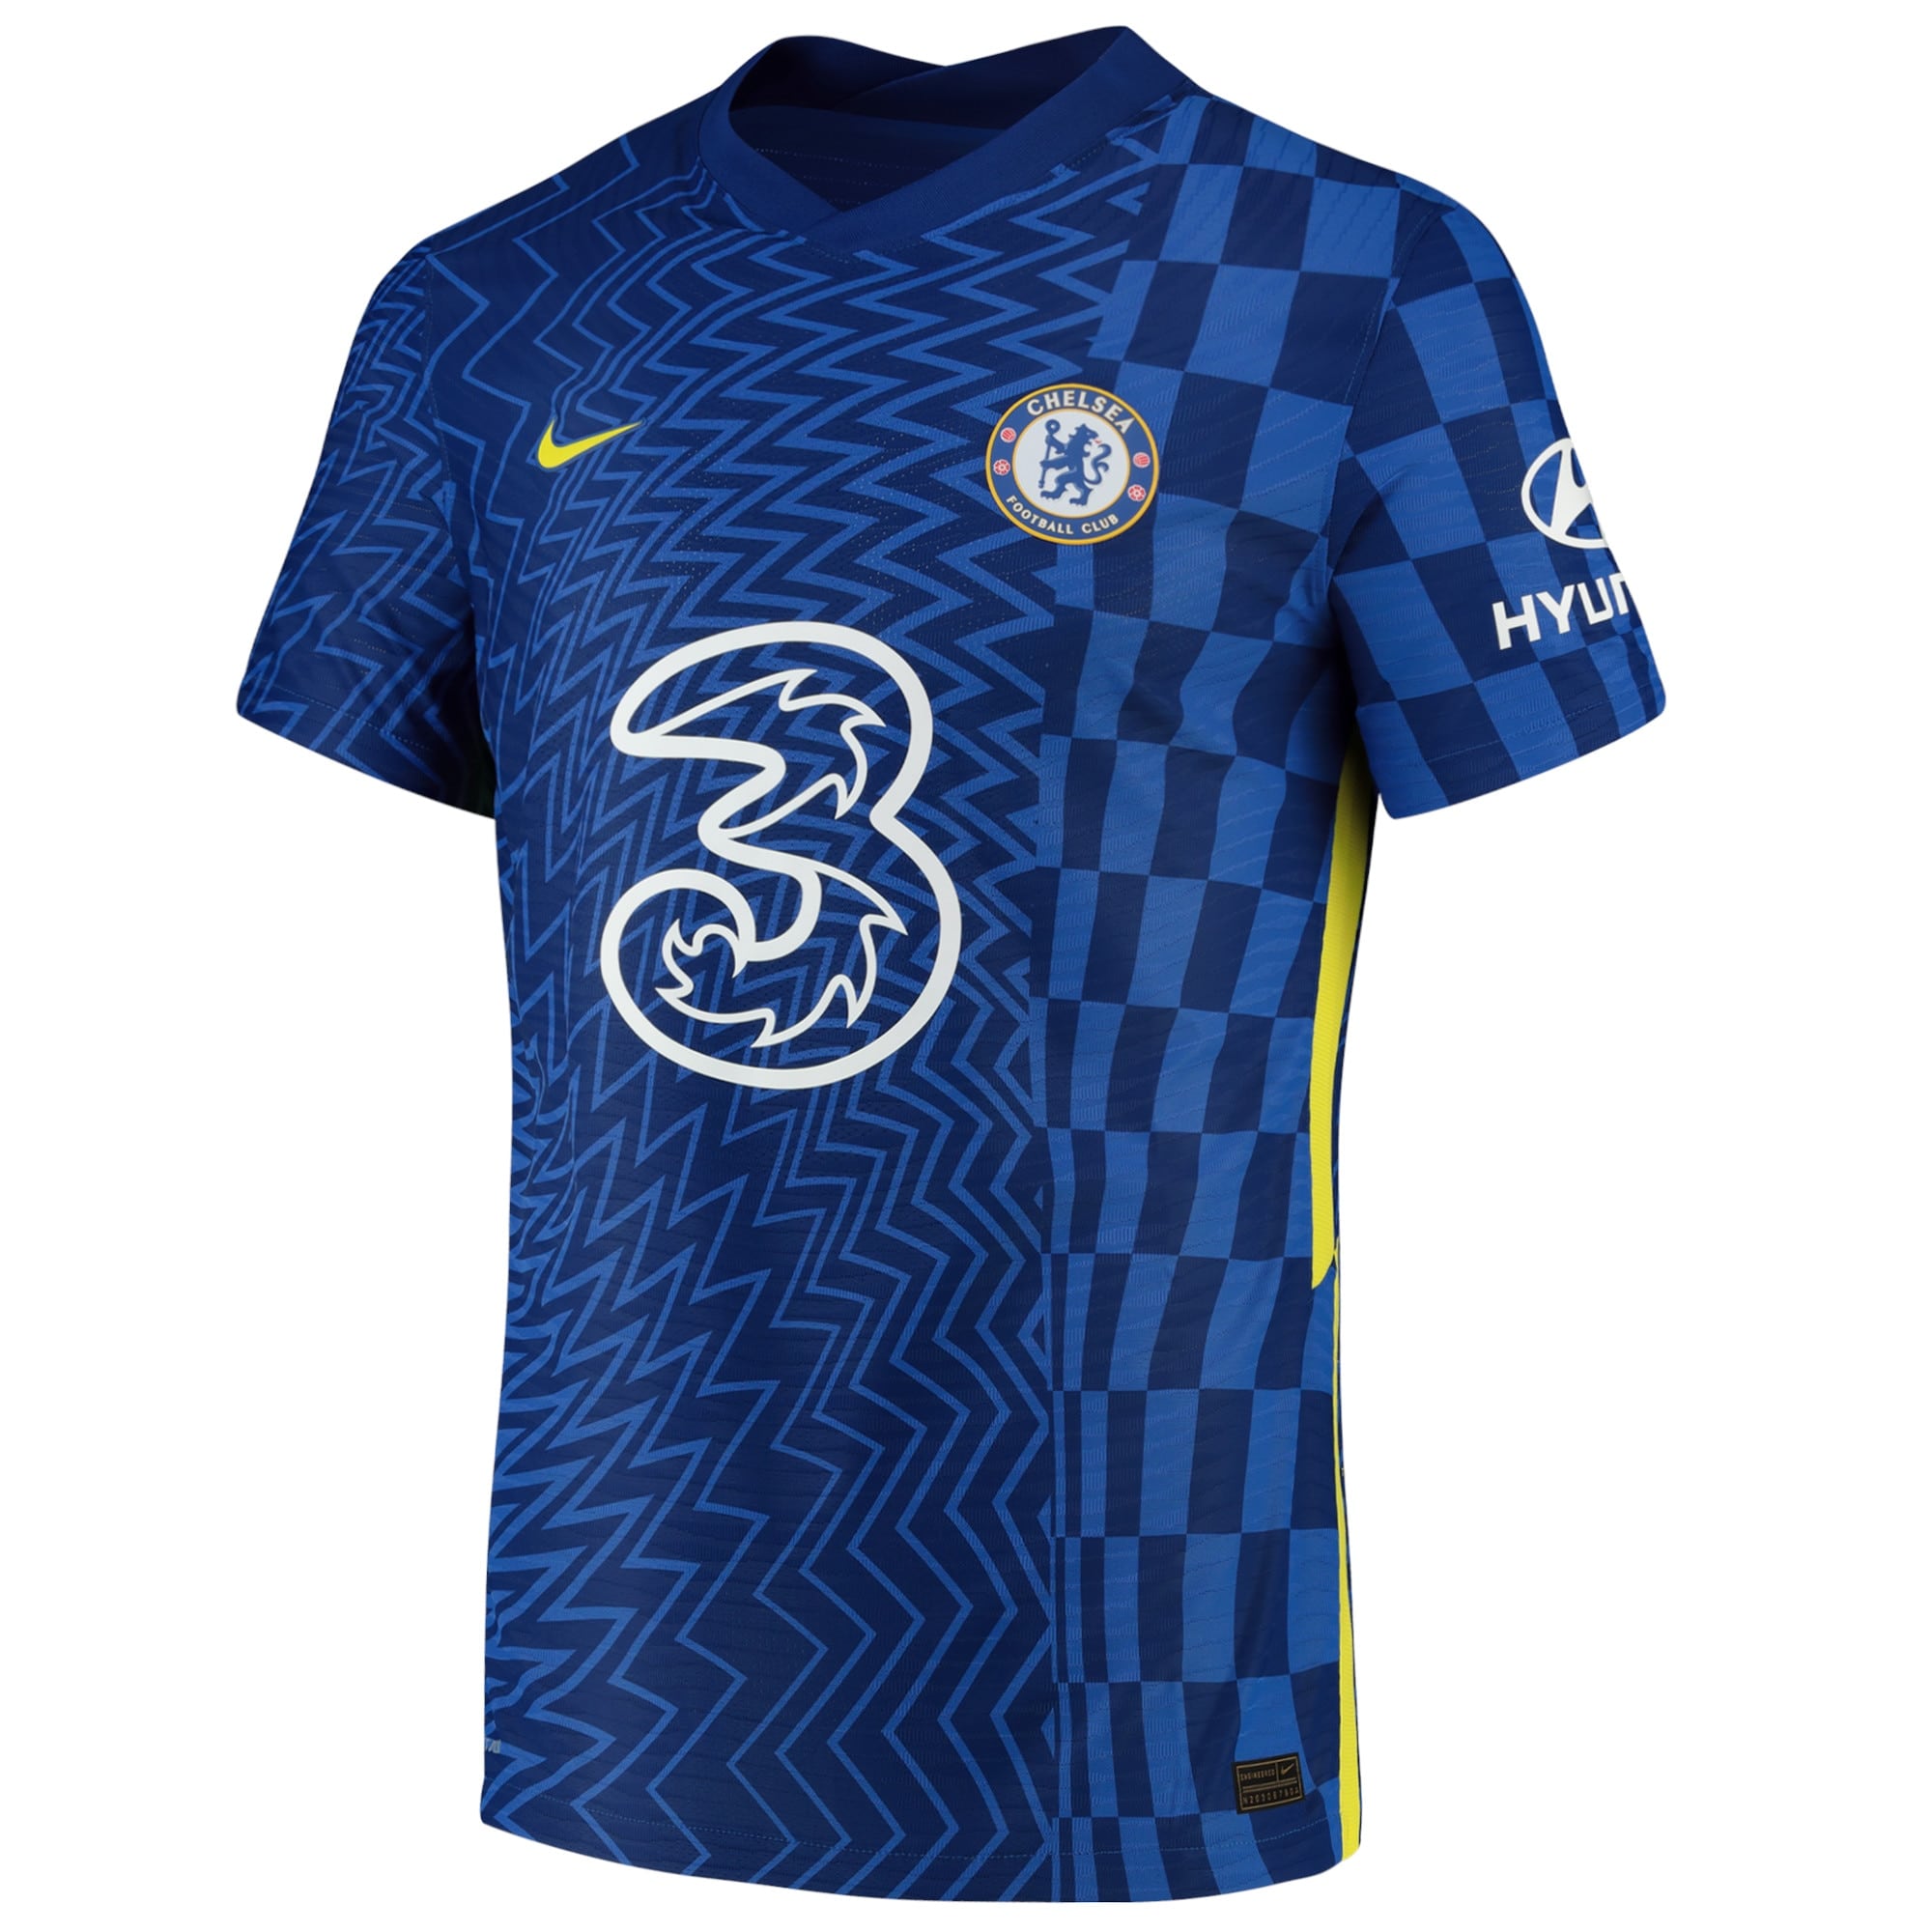 Chelsea Cup Home Vapor Match Shirt 2021-22 with Sarr 31 printing